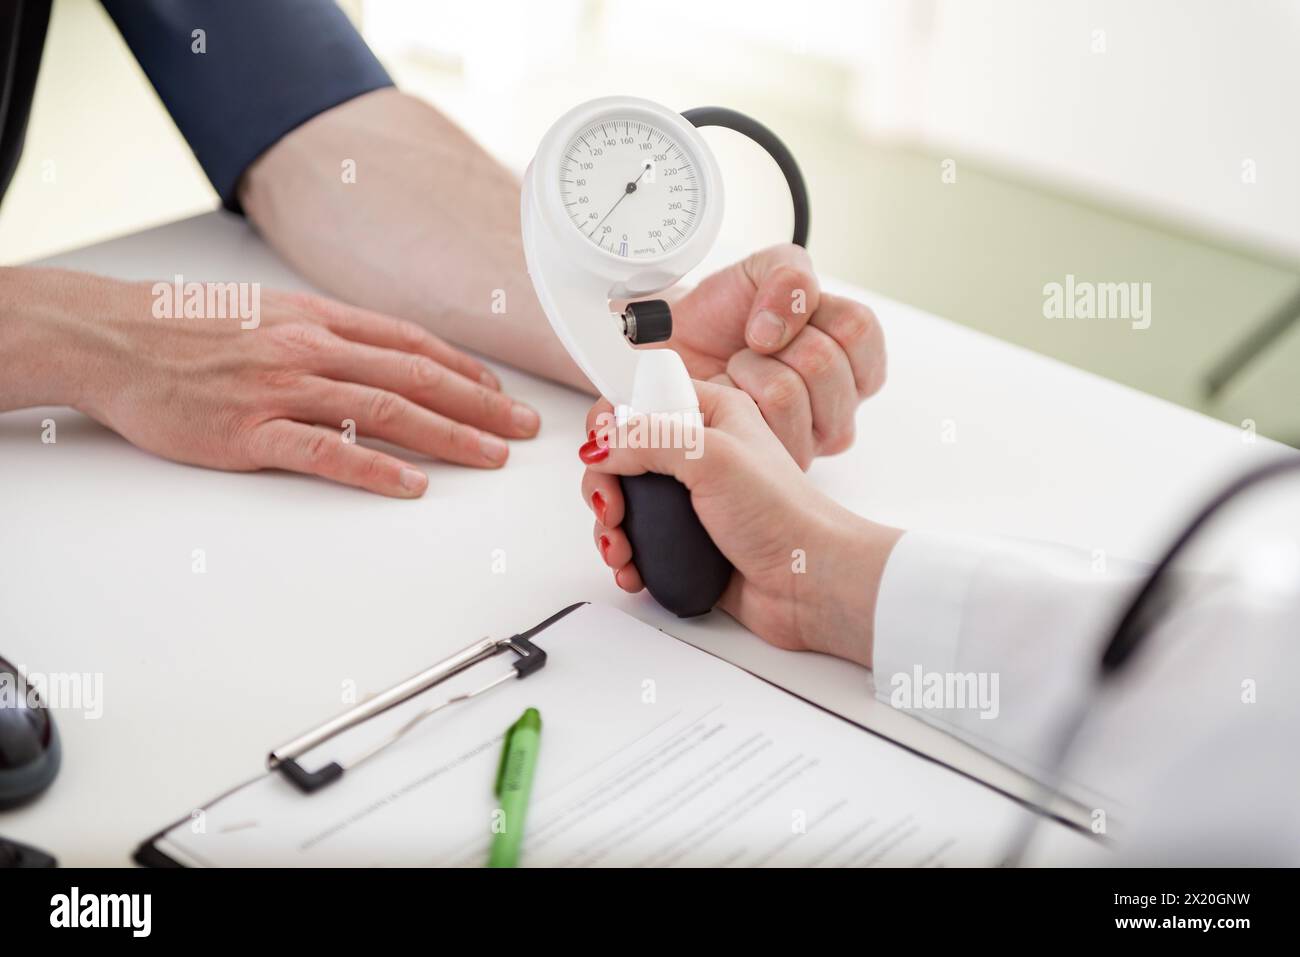 A medical expert focuses on writing down vital information in a clinical setting. Stock Photo